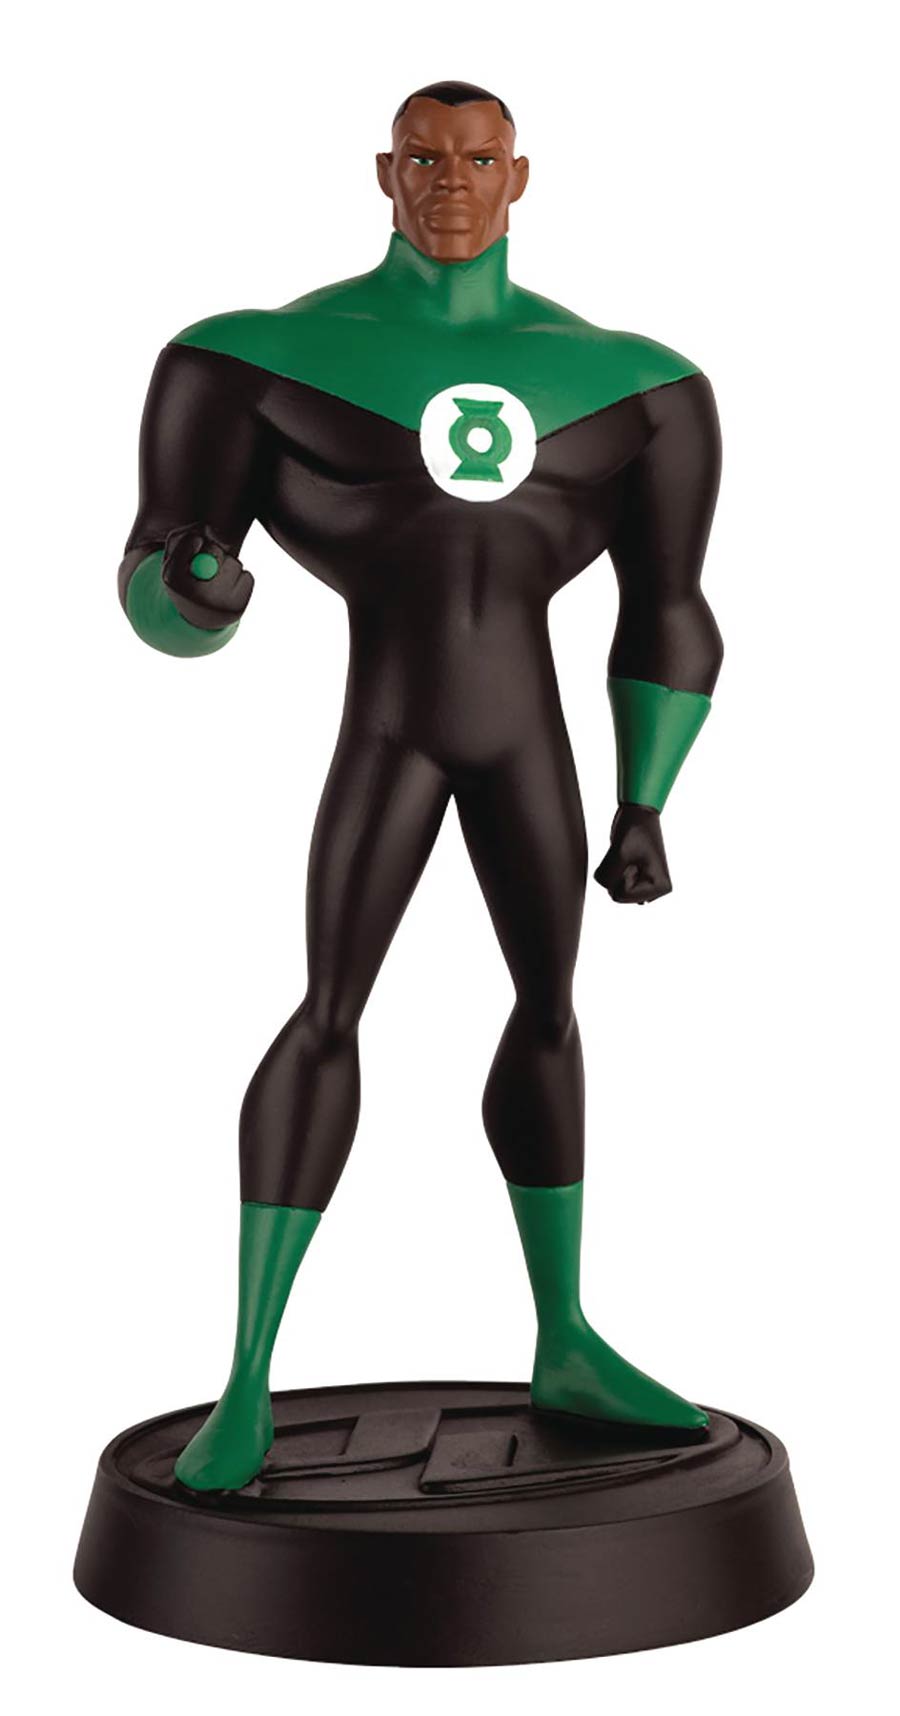 DC Justice League The Animated Series Figurine Collection Series 1 #3 Green Lantern